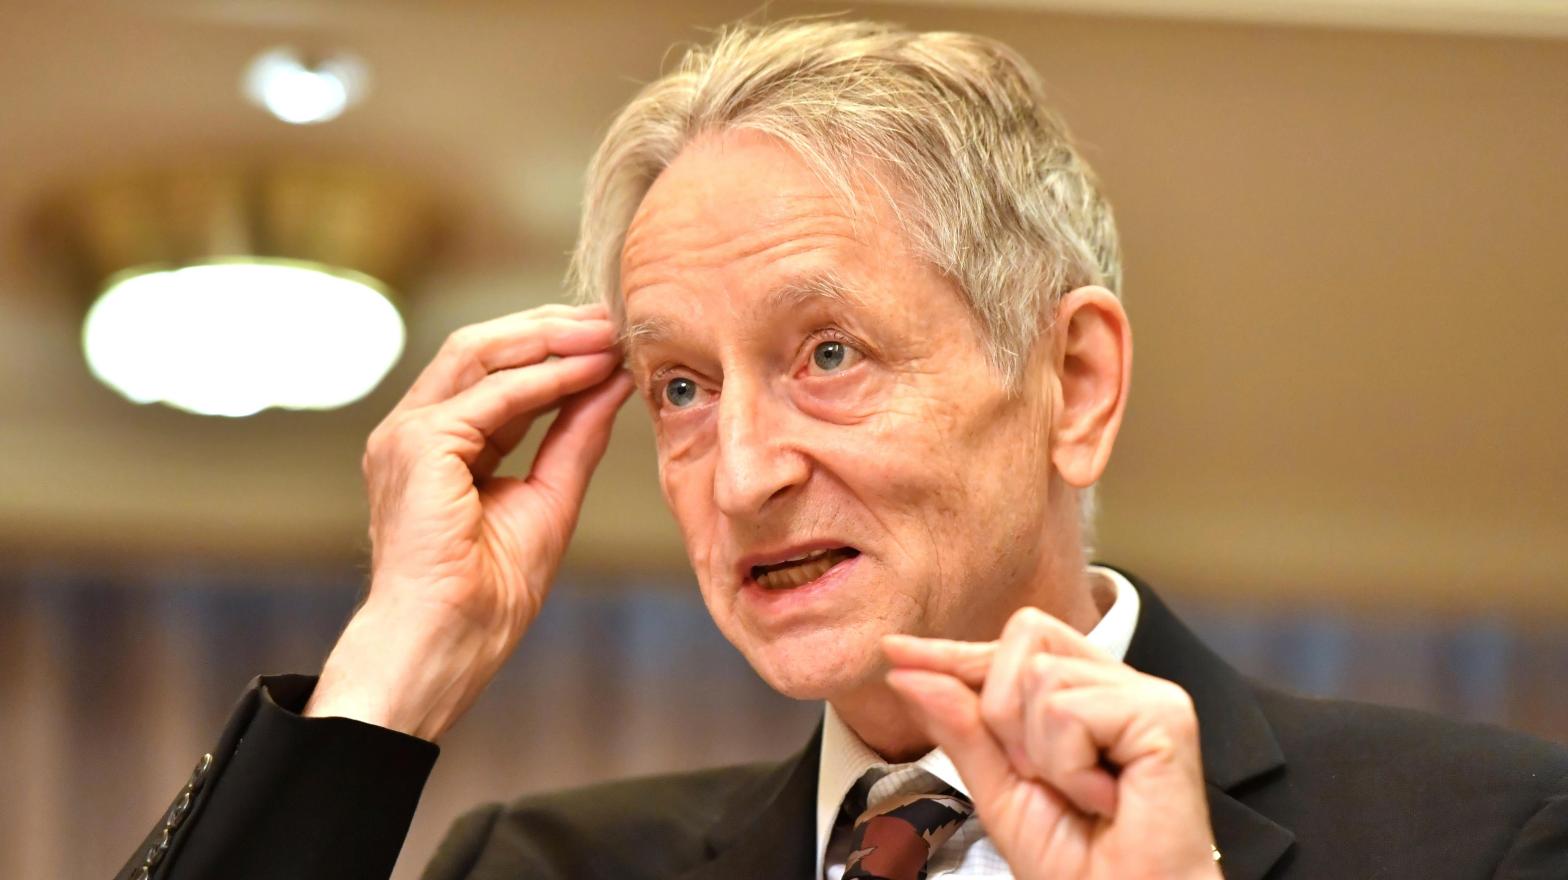 Dr. Geoffrey Hinton left his position at Google last month in order to warn about the dangers of rapid AI development. He previously compared modern AI systems to a 'precocious child' and 'butterflies.' (Photo: The Yomiuri Shimbun, AP)